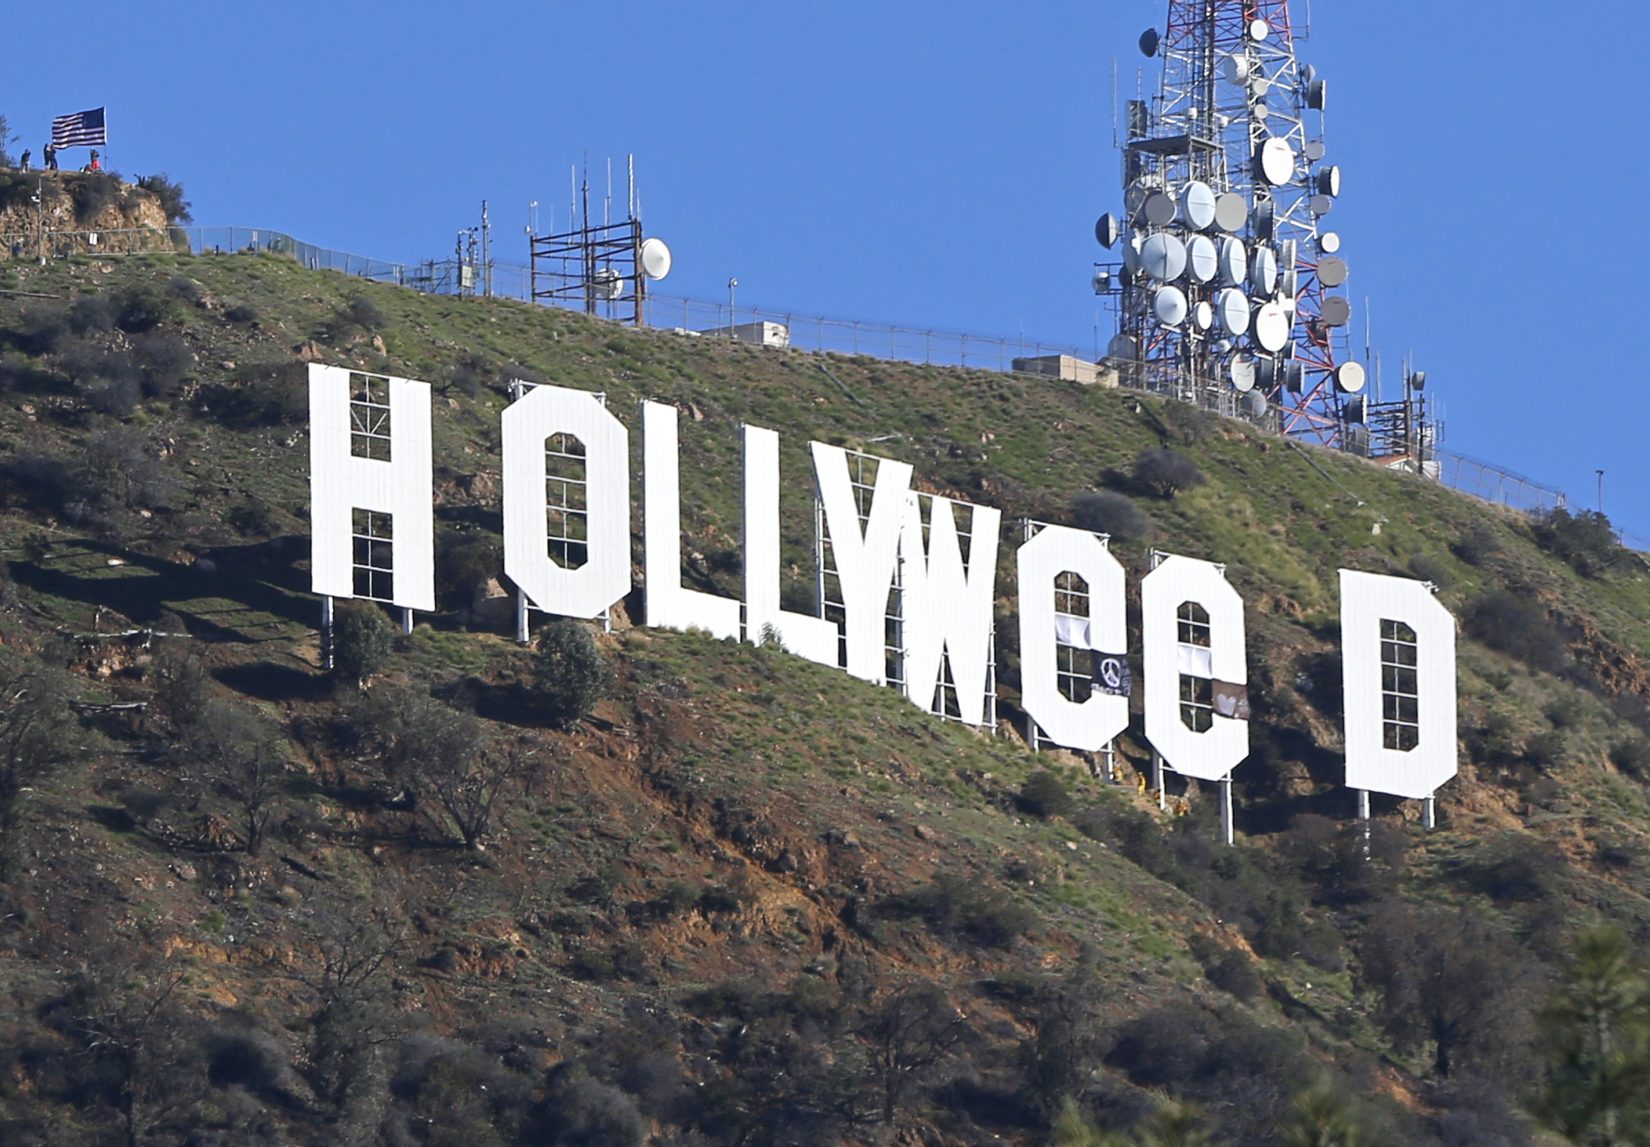 Vandalized Hollywood sign briefly reads "HOLLYWeeD"